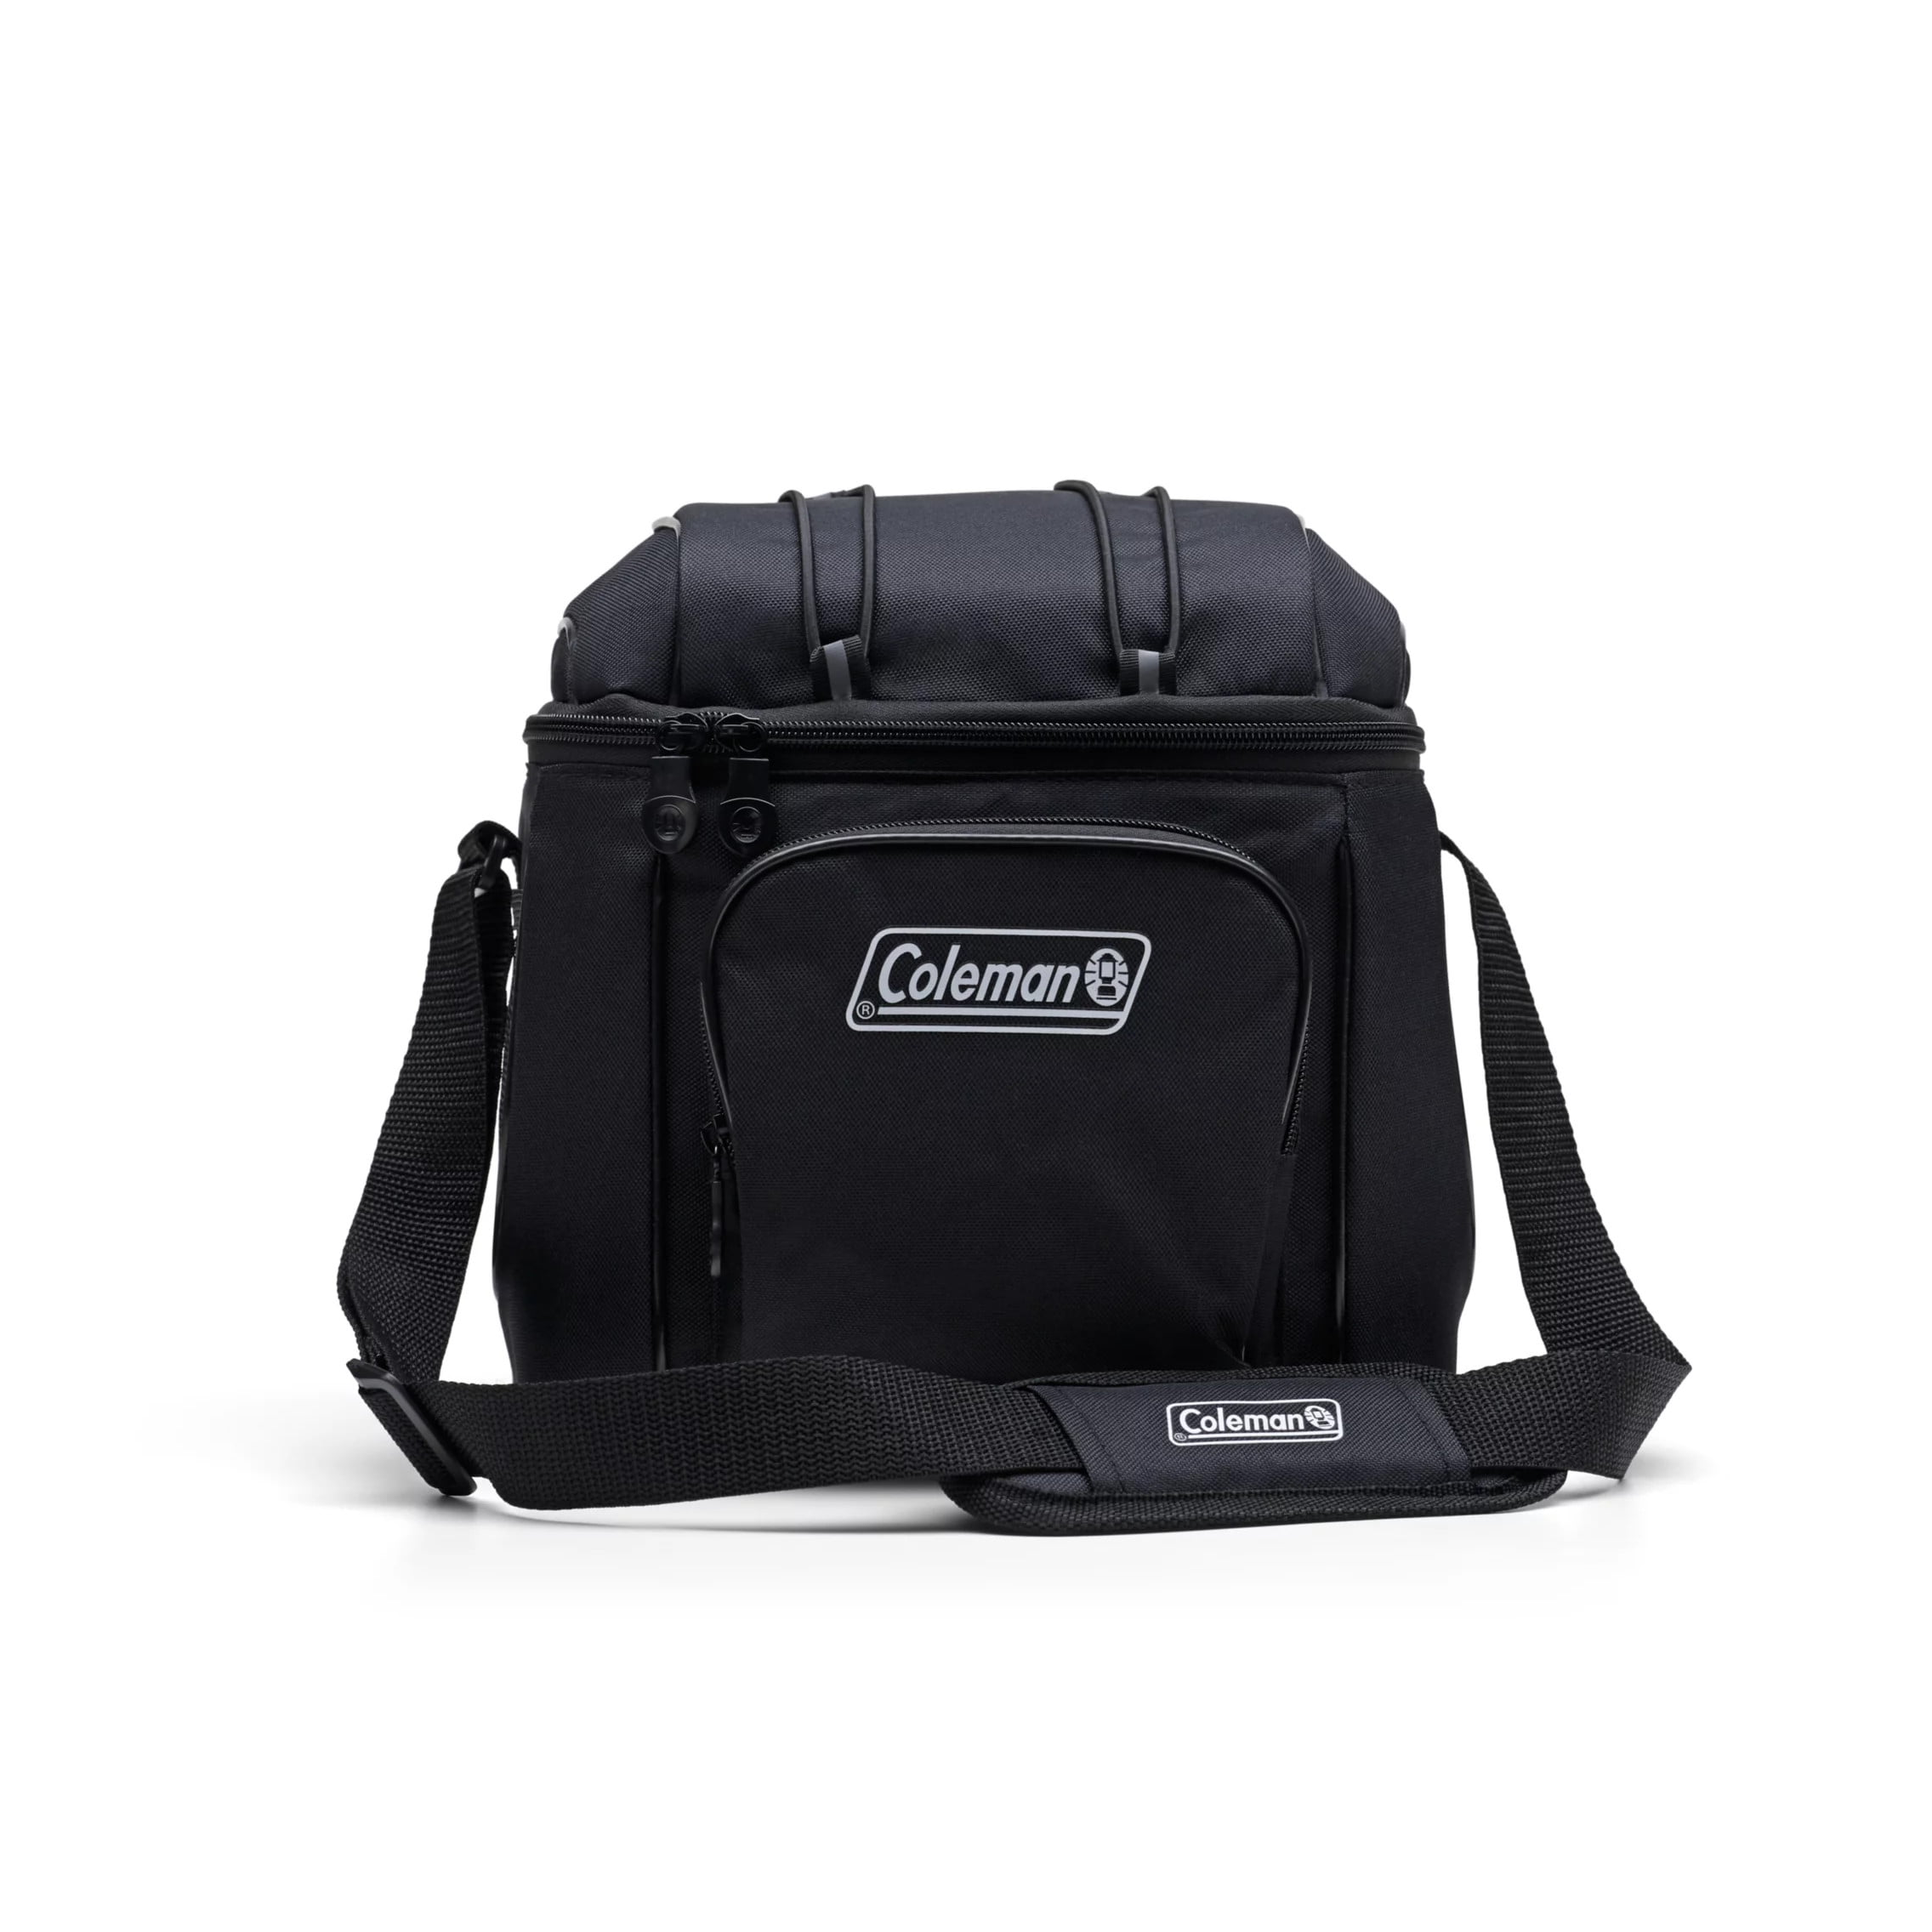 Coleman CHILLER 9-cans Insulated Soft Cooler Bag, Black - image 1 of 5